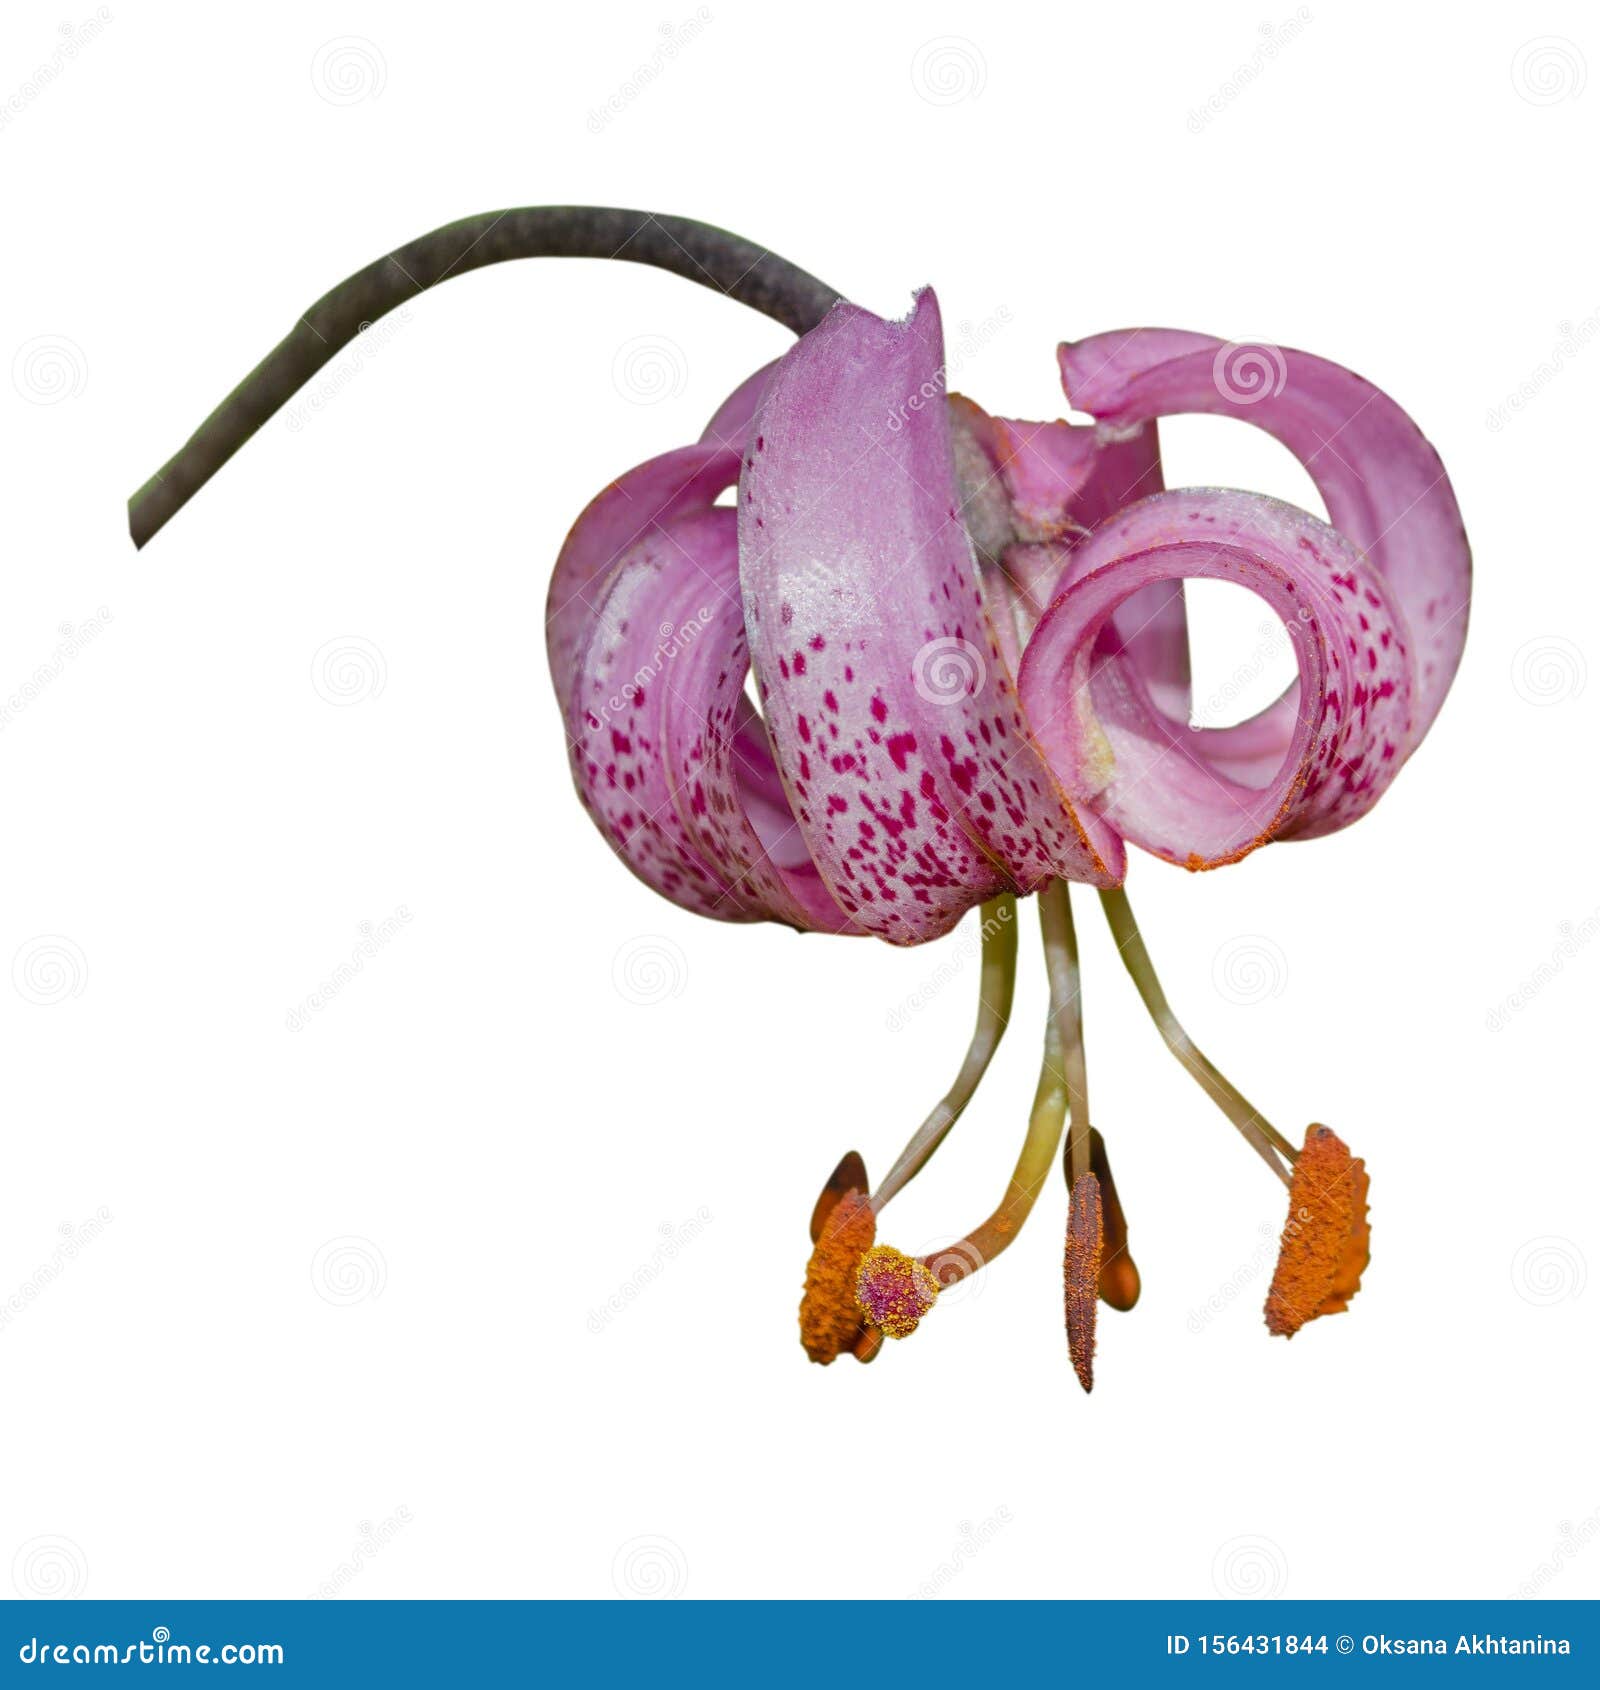 lilium martagon commonly known as martagon lily or turk`s cap lily